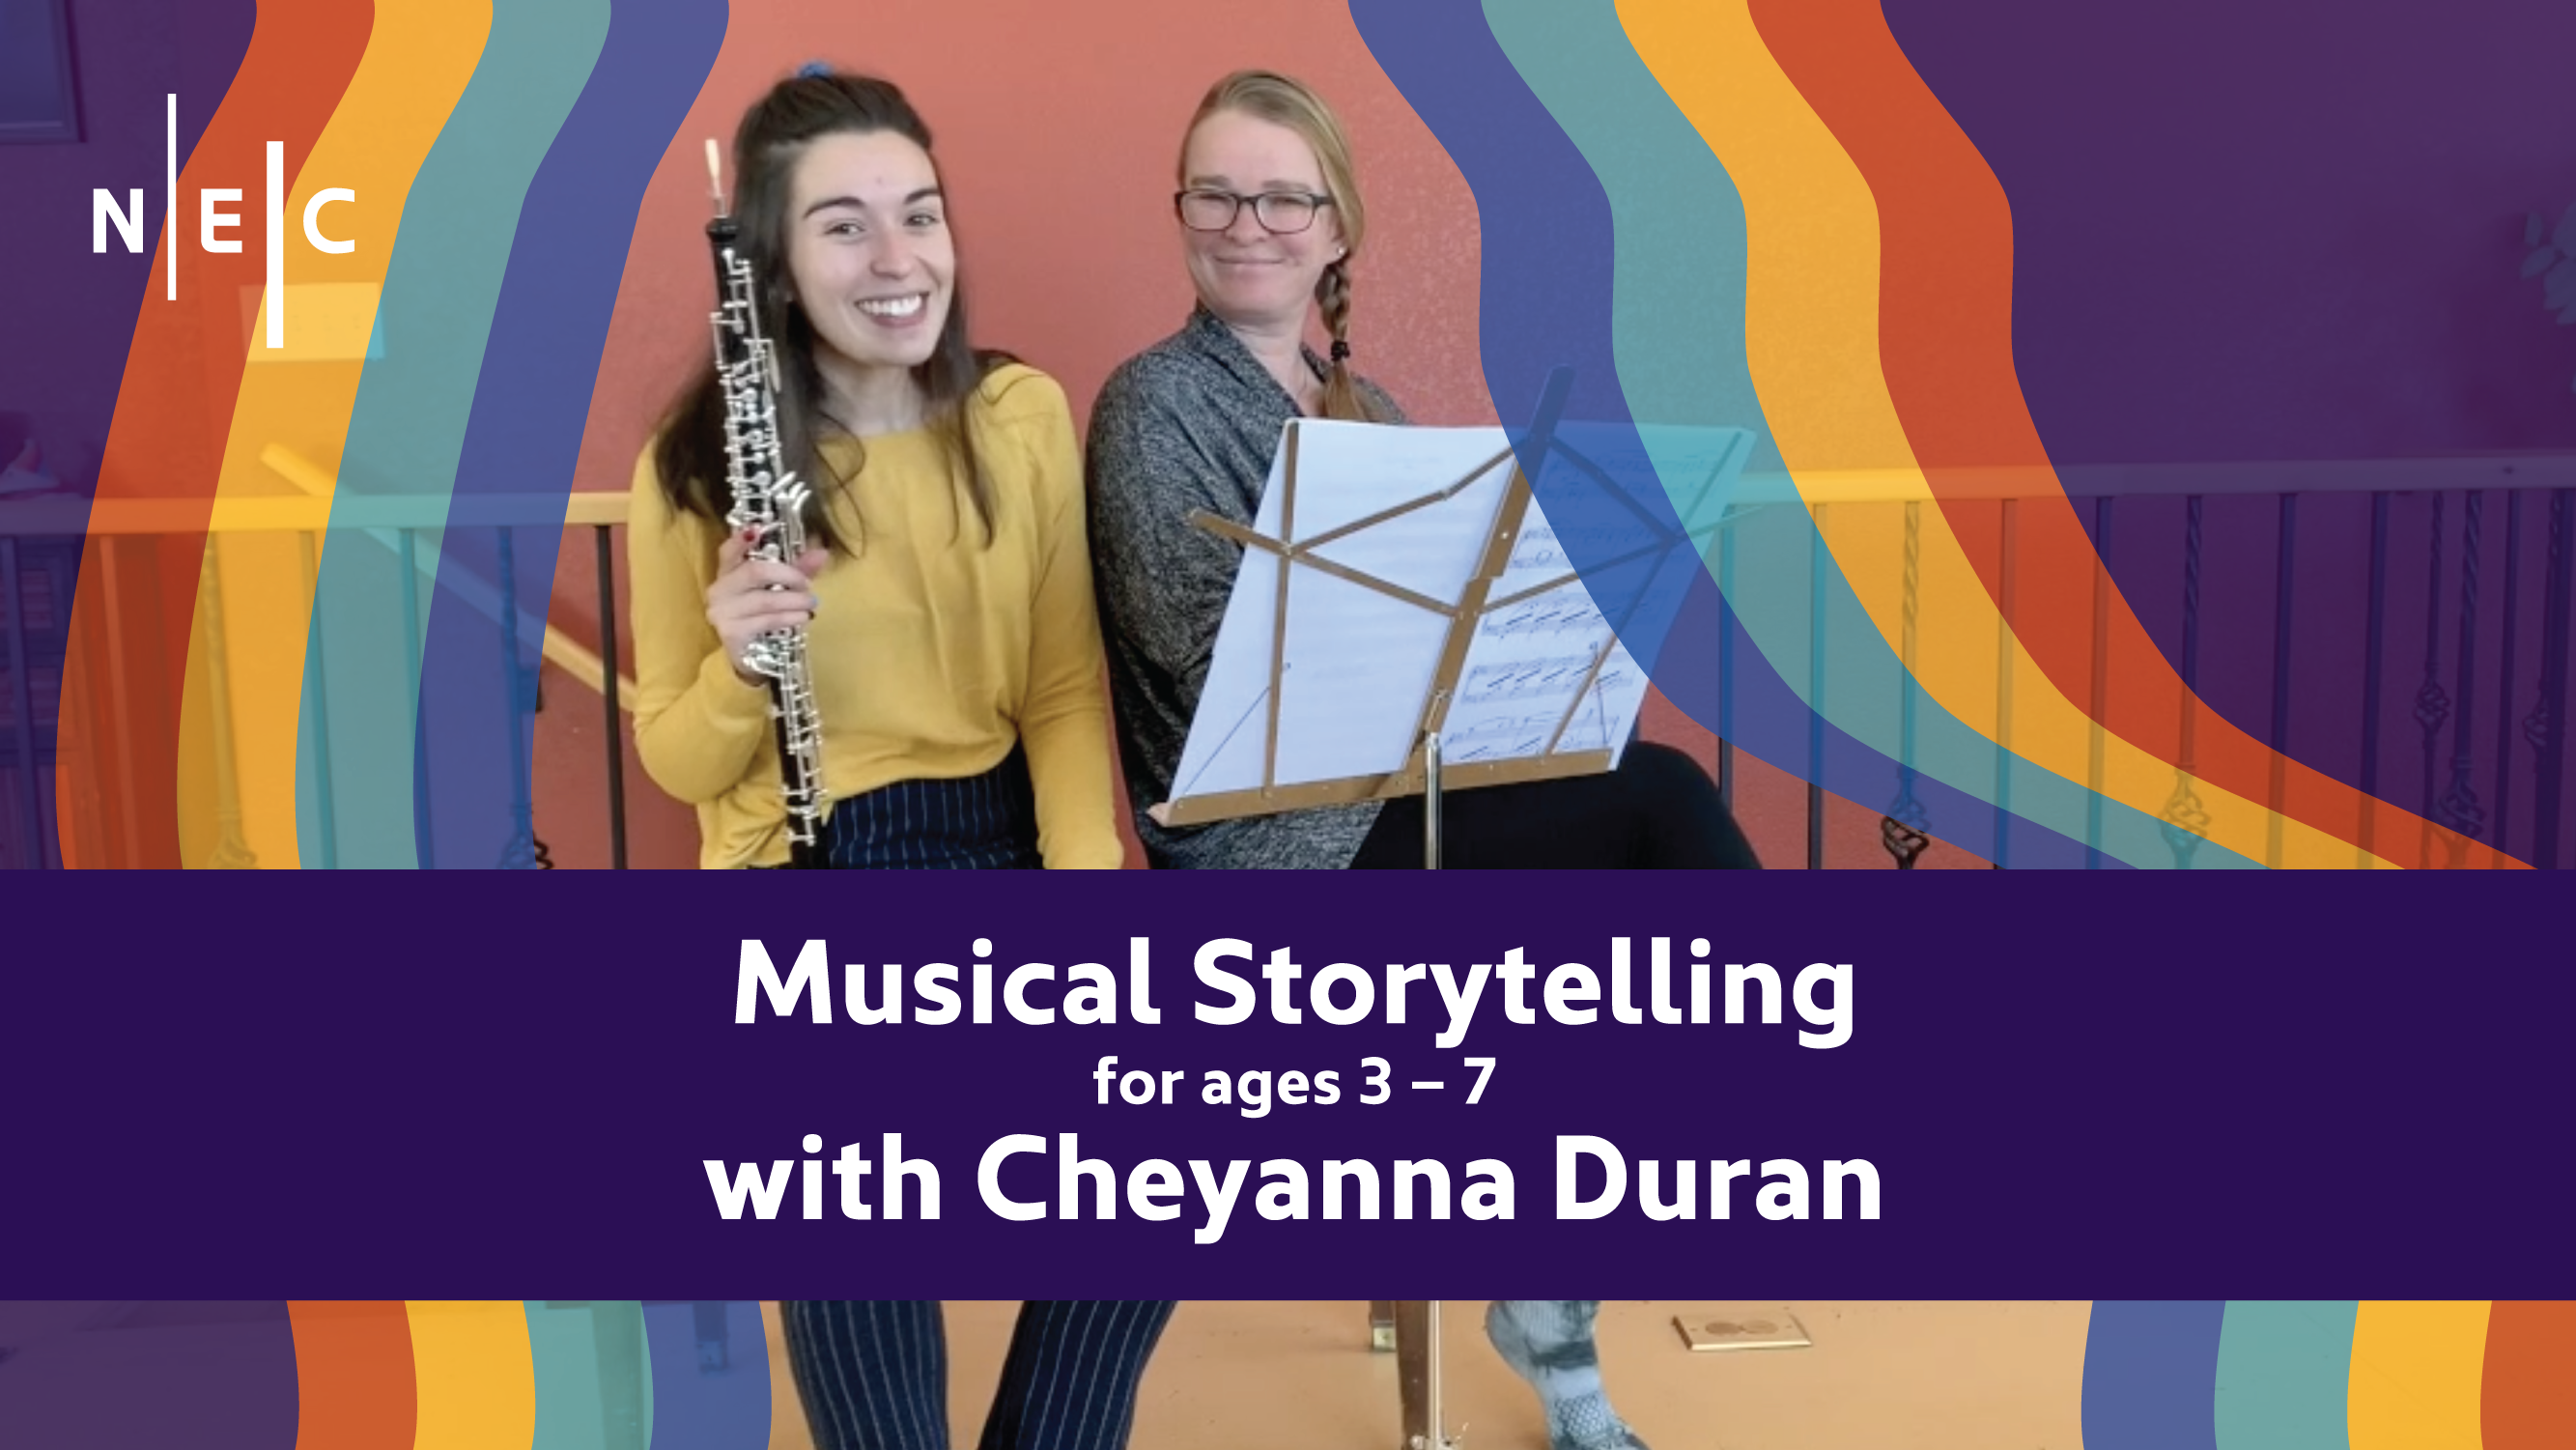 Cheyanna Duran and her mom smile with a rainbow background. Text: Musical Storytelling for ages 3 – 7 with Cheyanna Duran